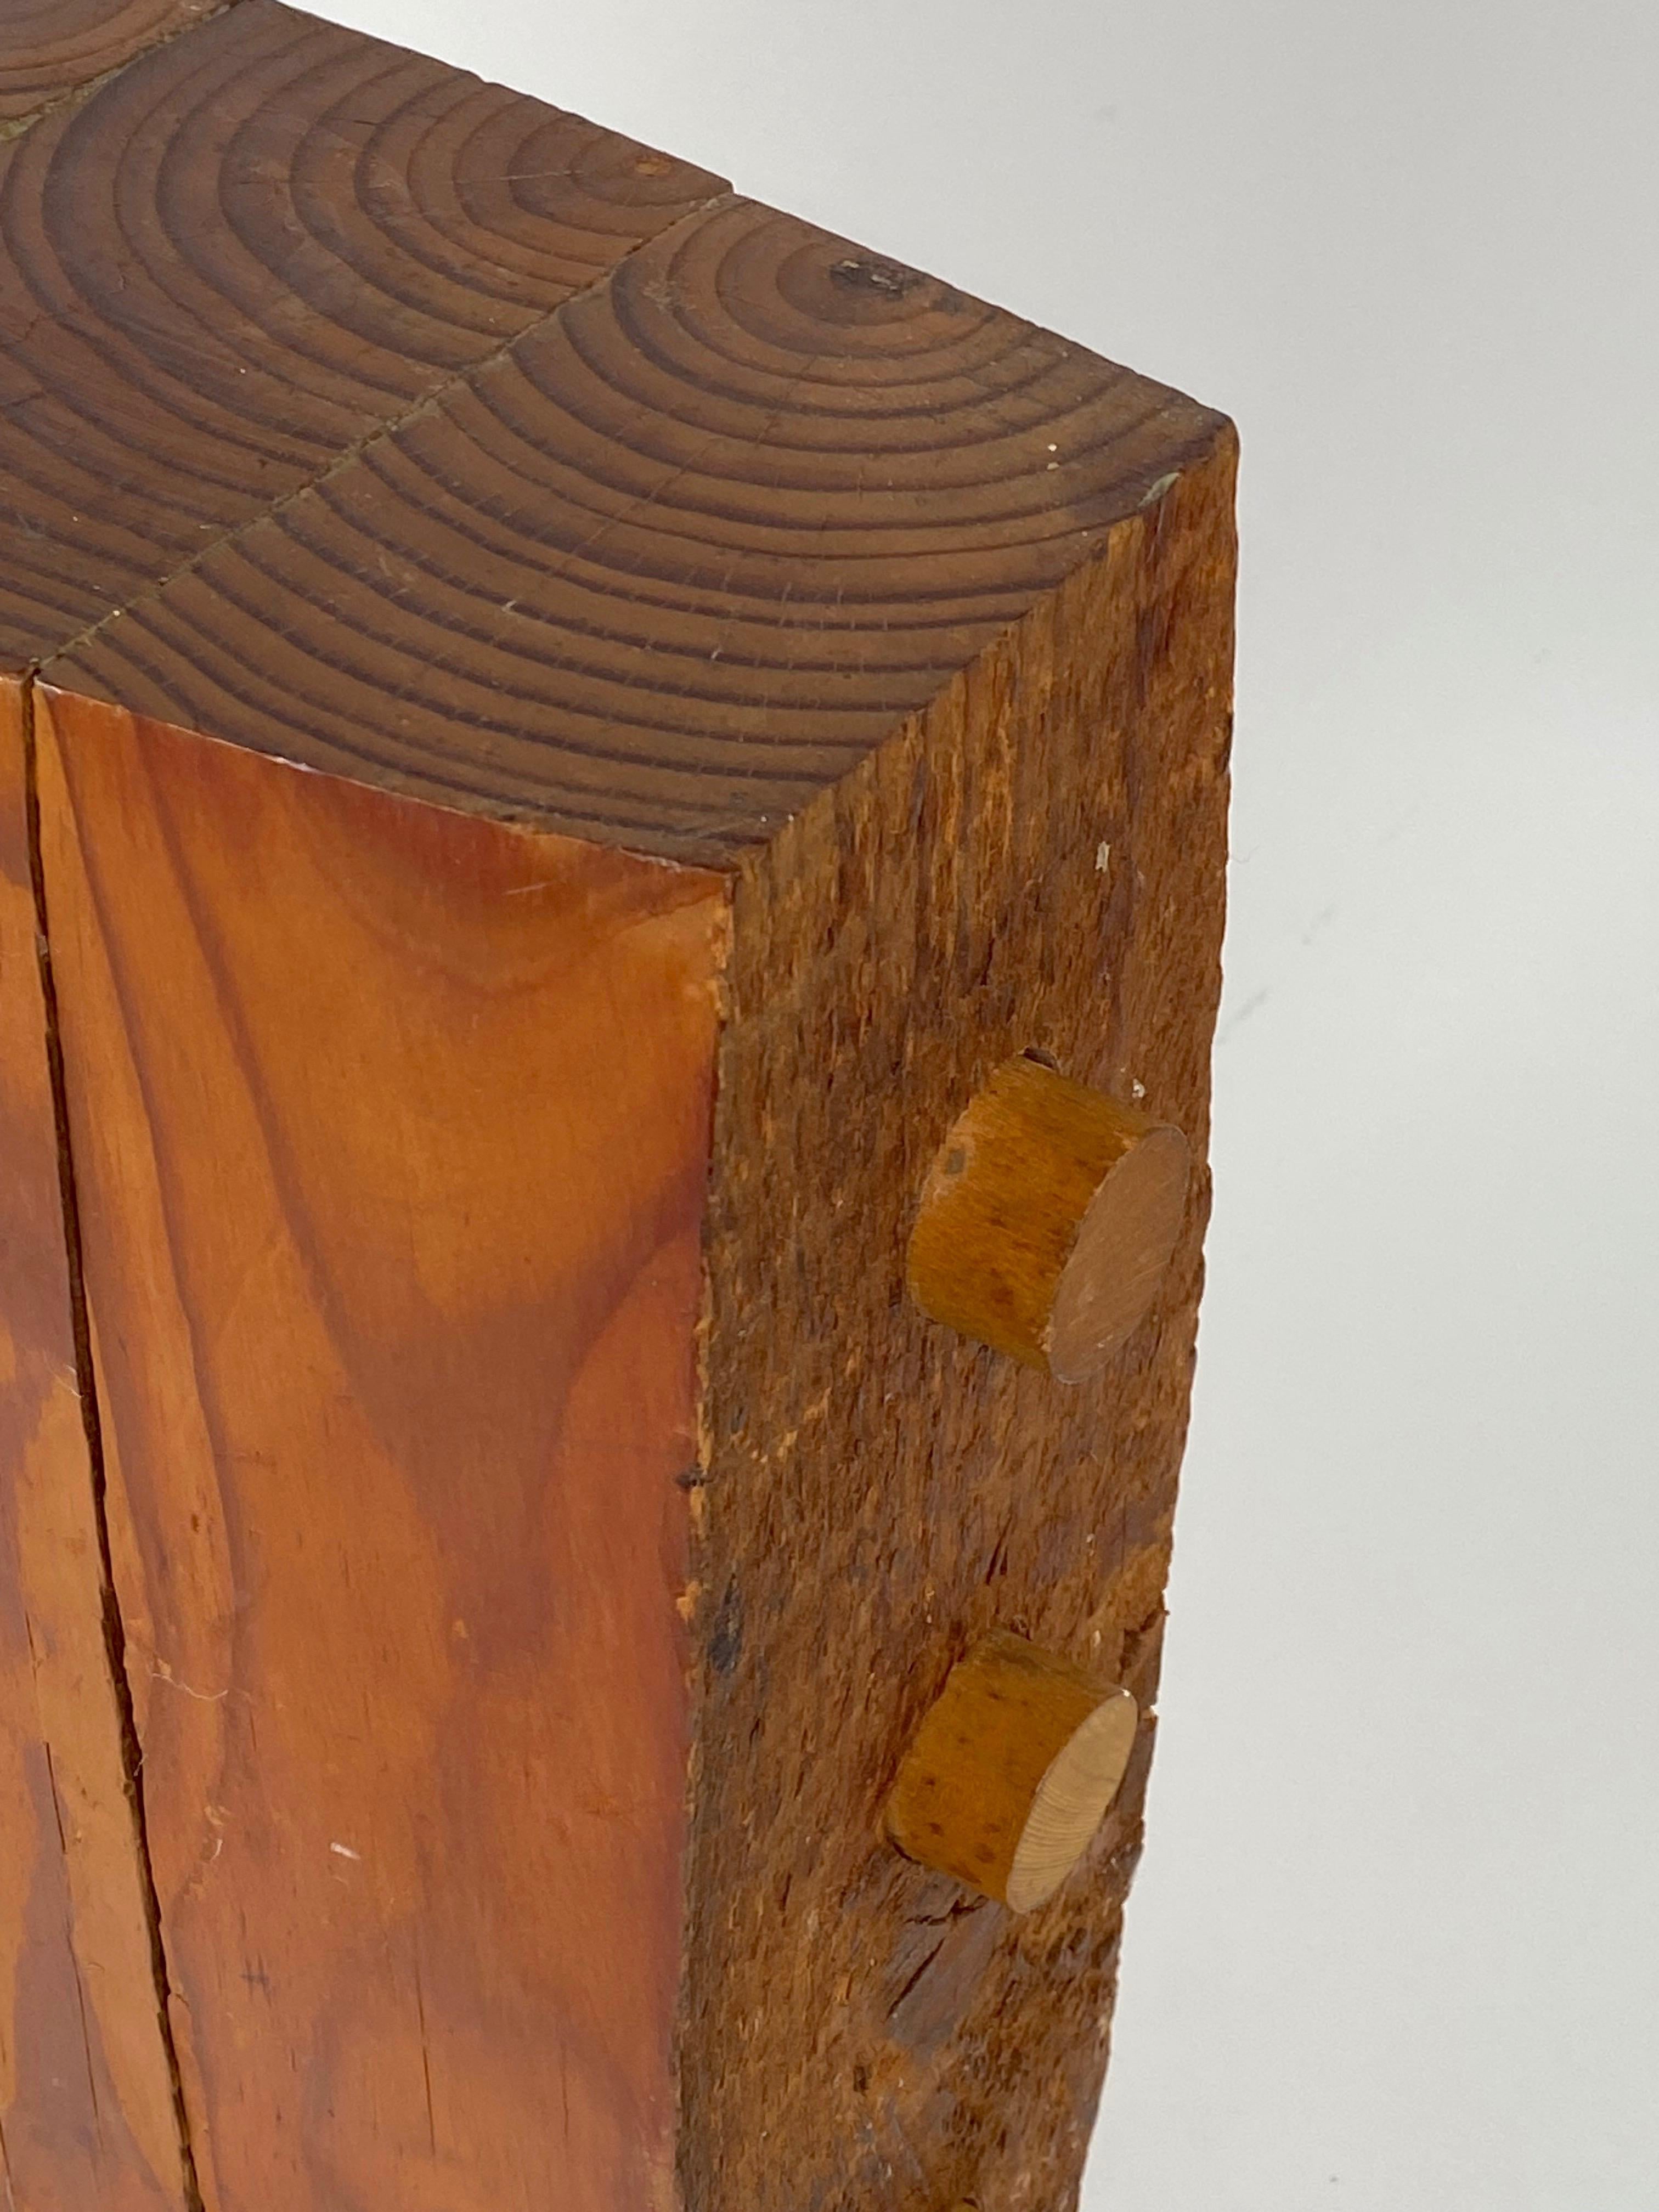 Organic Modern Wooden Abstract Sculpture In Good Condition For Sale In Oakland, CA